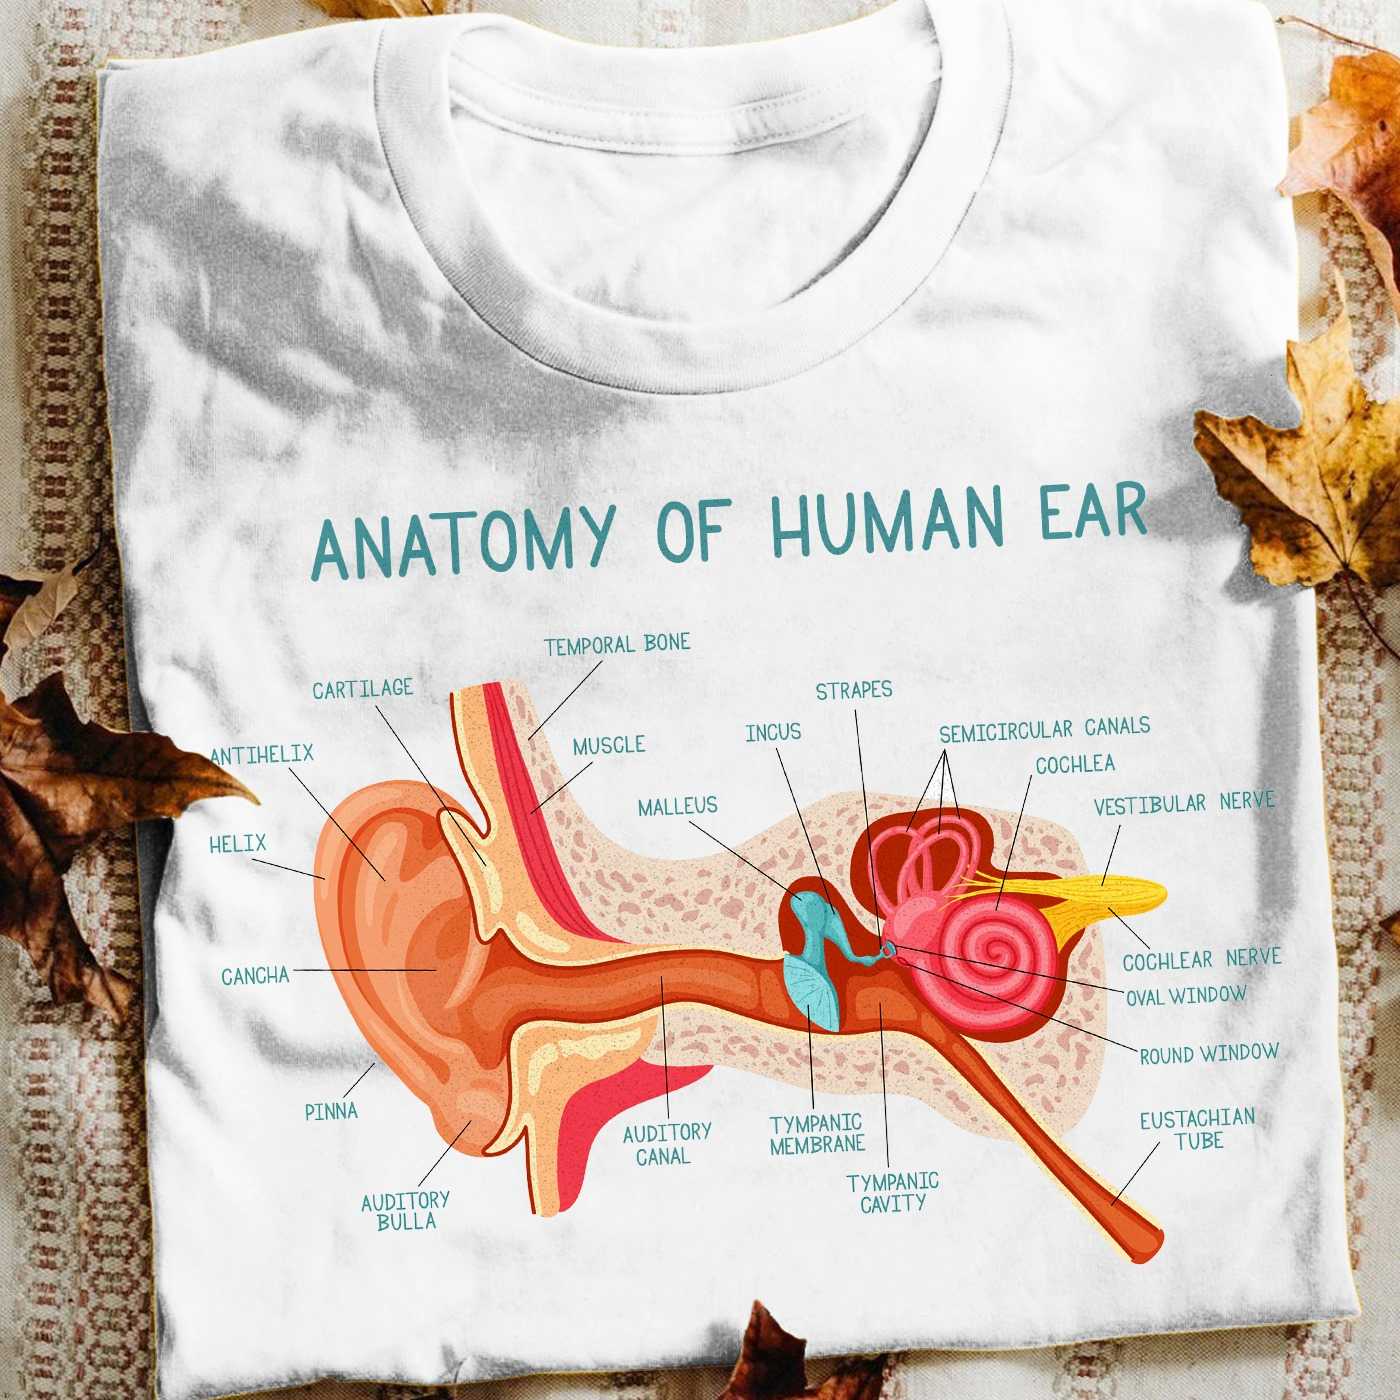 Structure Of The Ear - Anatomy of human ear